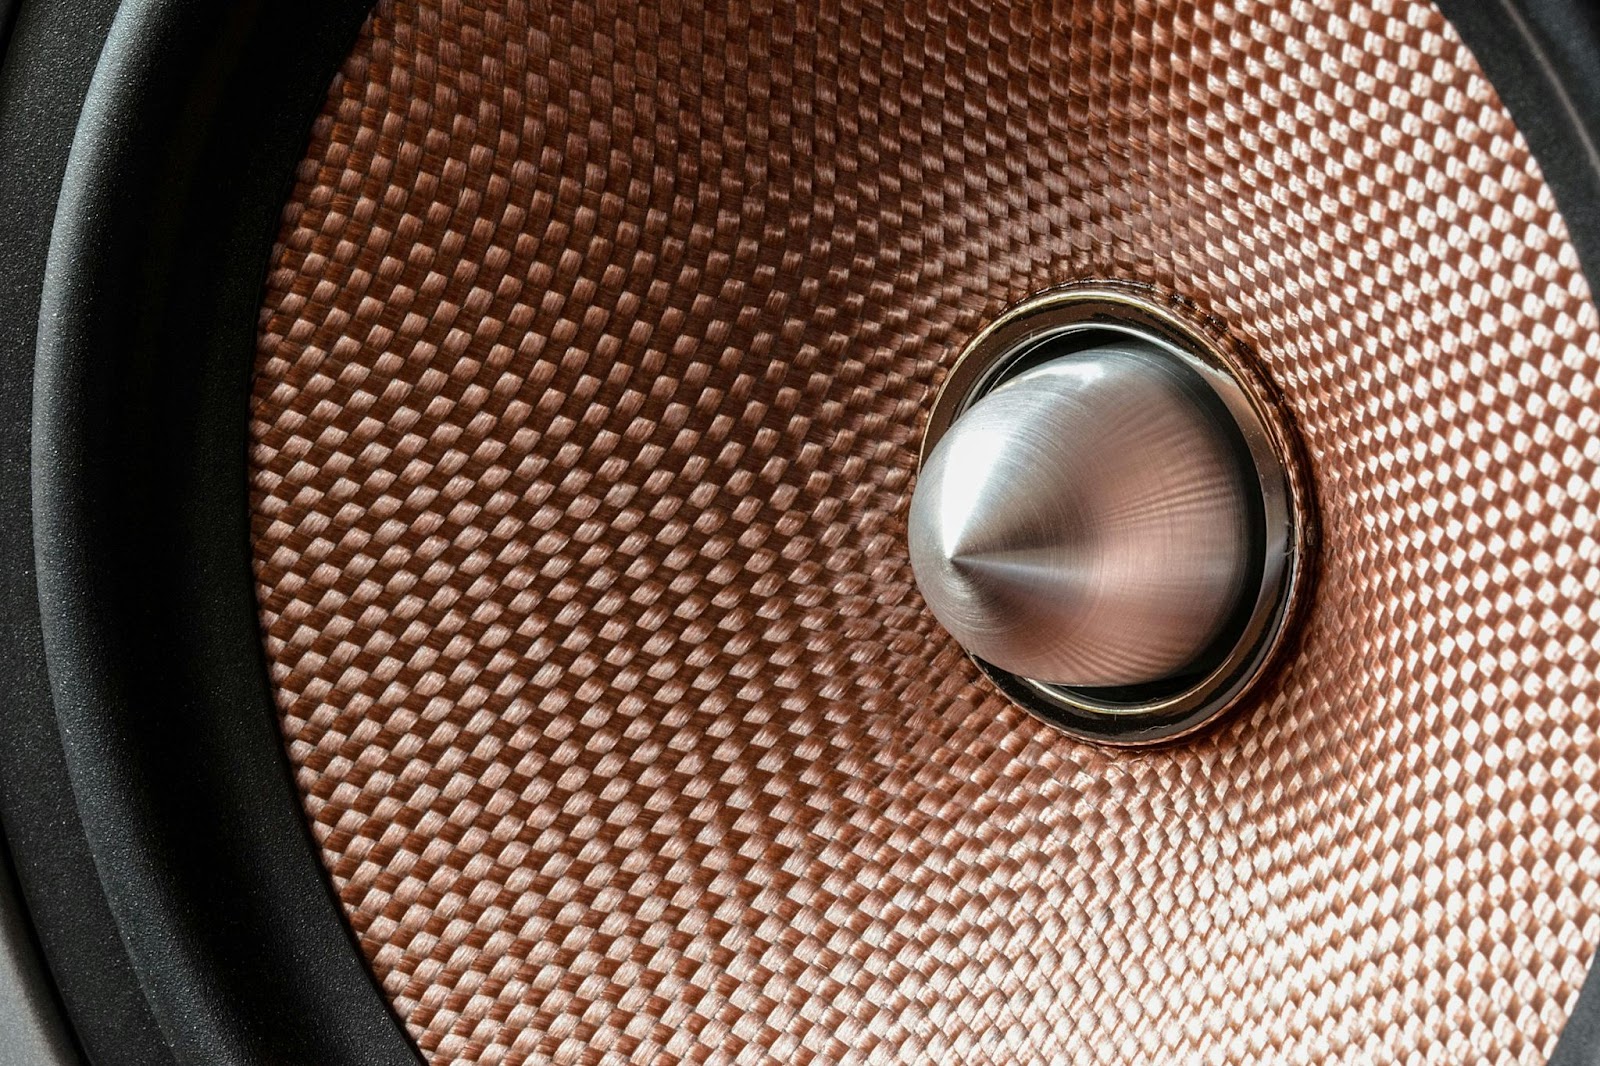 Design and Technology of SVS and Klipsch